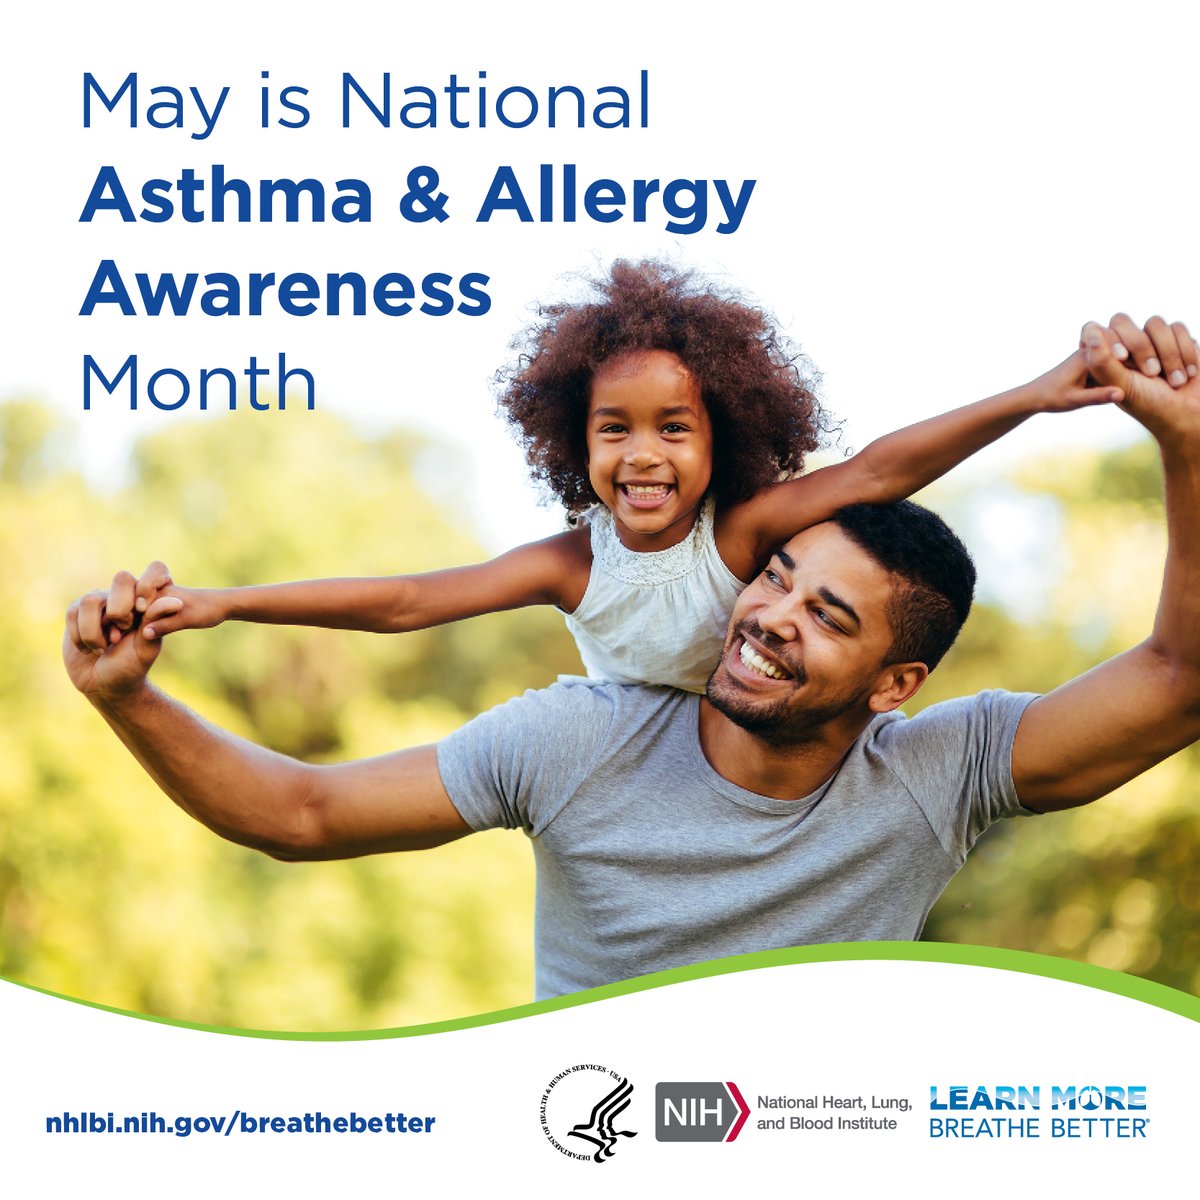 Black and Hispanic residents in MA had 3-4x higher rates of ER visits for asthma than White, non-Hispanic residents. Honoring #AsthmaAwarenessMonth means recognizing the structural inequities in asthma burden. Learn more: ow.ly/rrNQ50RUcTg